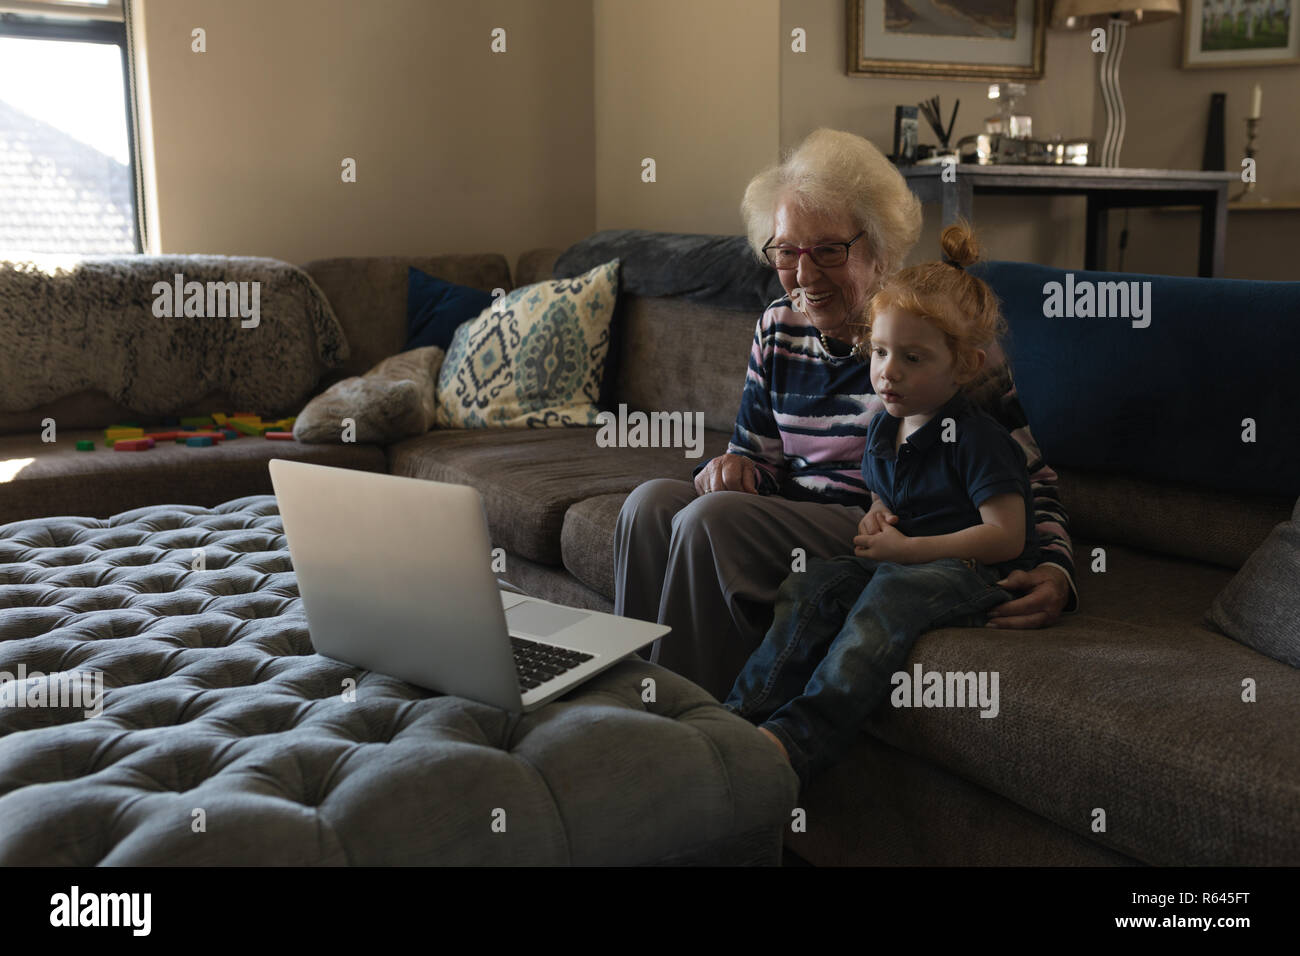 Grandmother and granddaughter making video call on laptop in living room Stock Photo